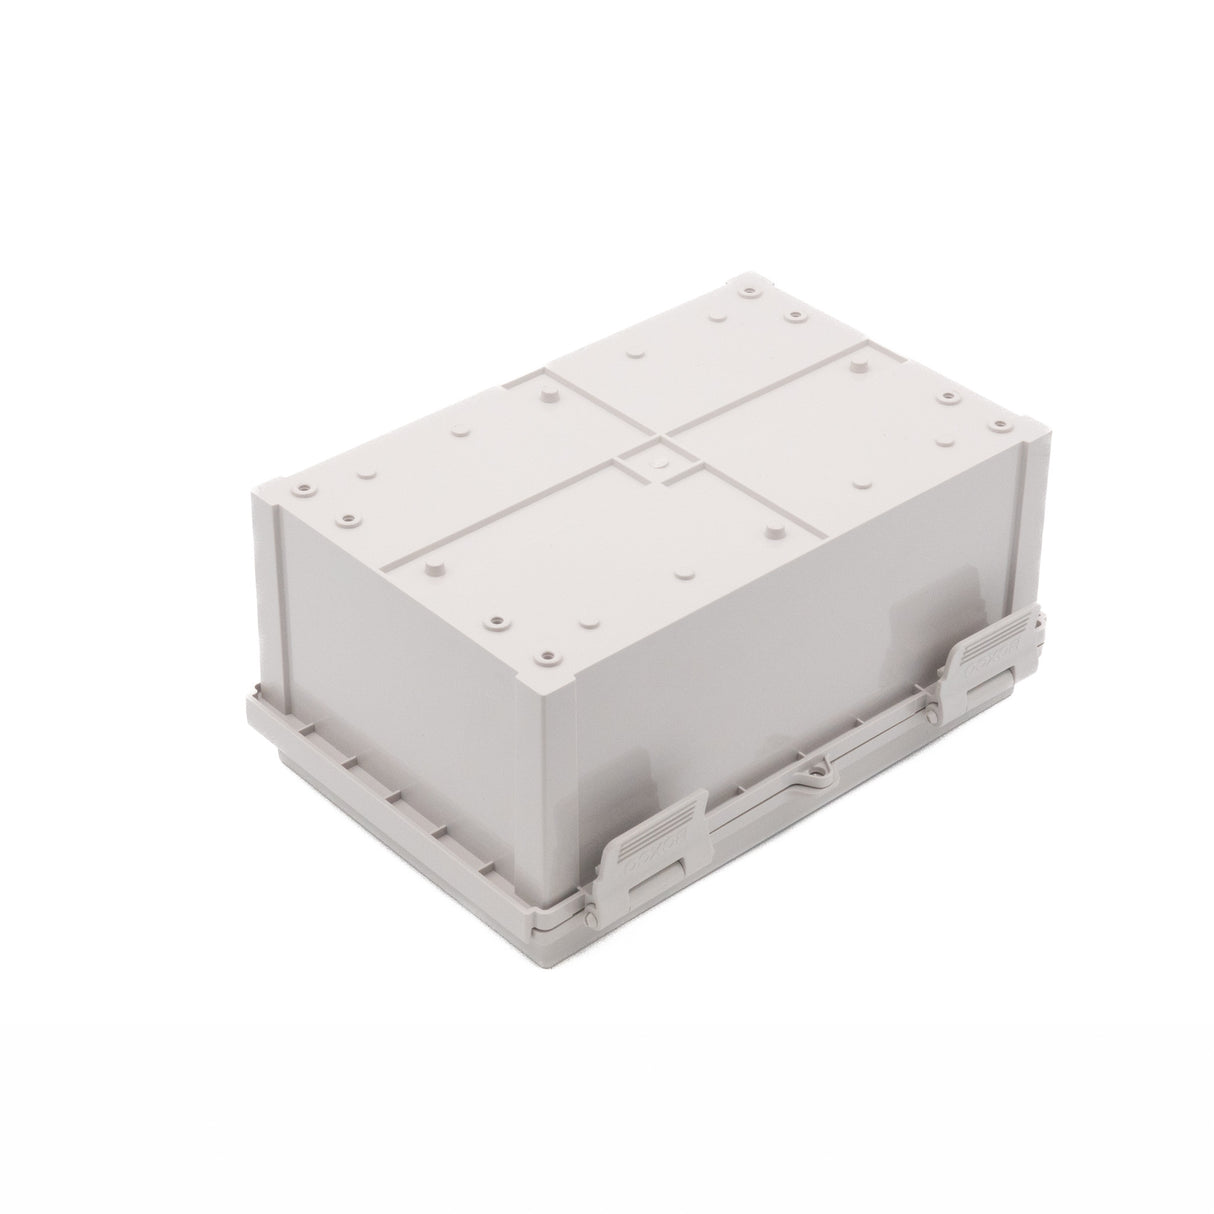 Boxco Q-Series 200x300x140mm Plastic Enclosure, IP67, IK08, ABS, Grey Cover, Hinge Type with Plate - PHOTO 1